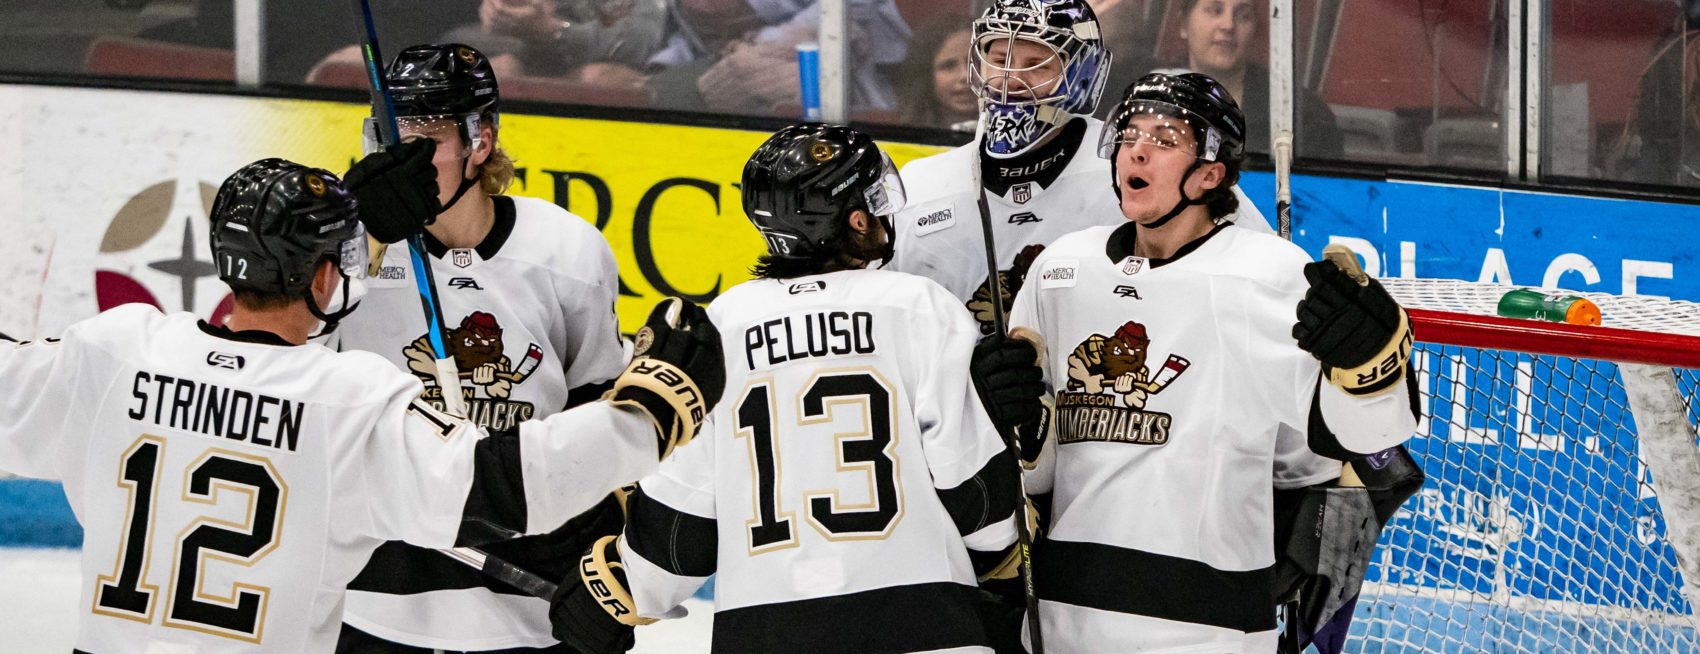 Lumberjacks stay hot in Clark Cup Playoffs, open Eastern Conference Finals with win over Madison